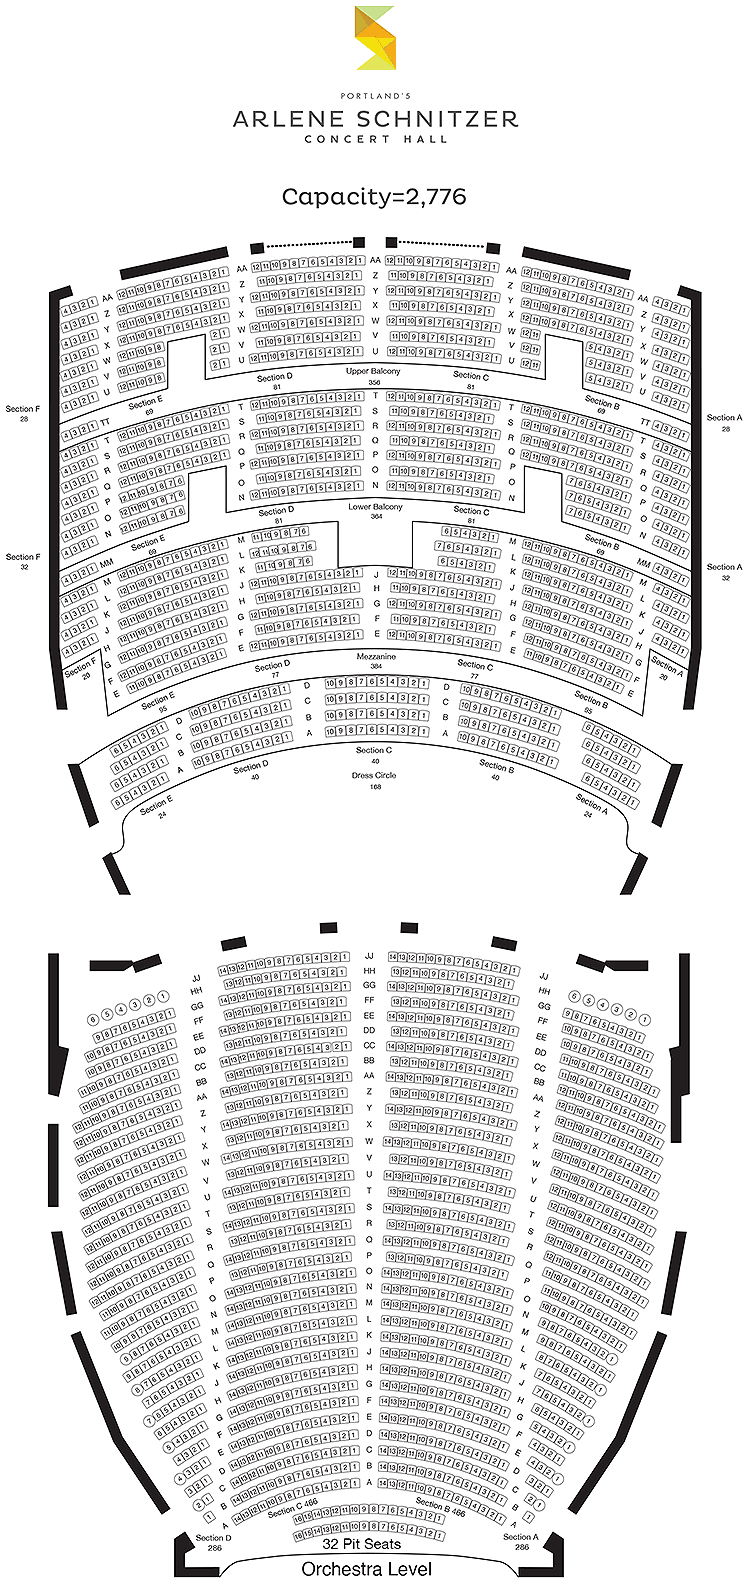 Seating Chart Arlene Schnitzer Concert Hall Portland Awesome Home